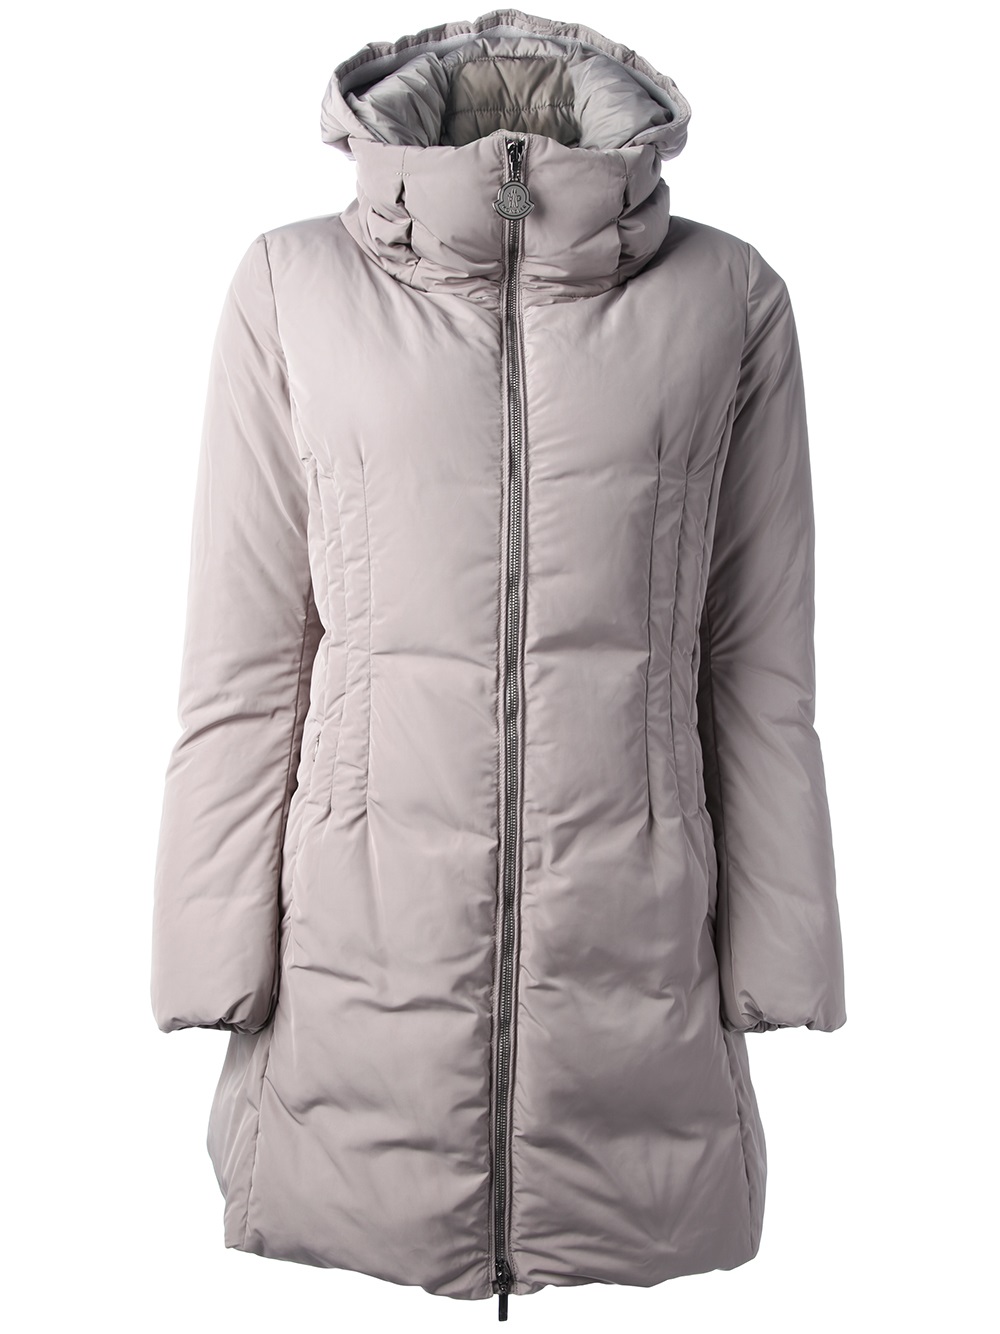 Moncler Renne Feather Down Coat in Gray - Lyst